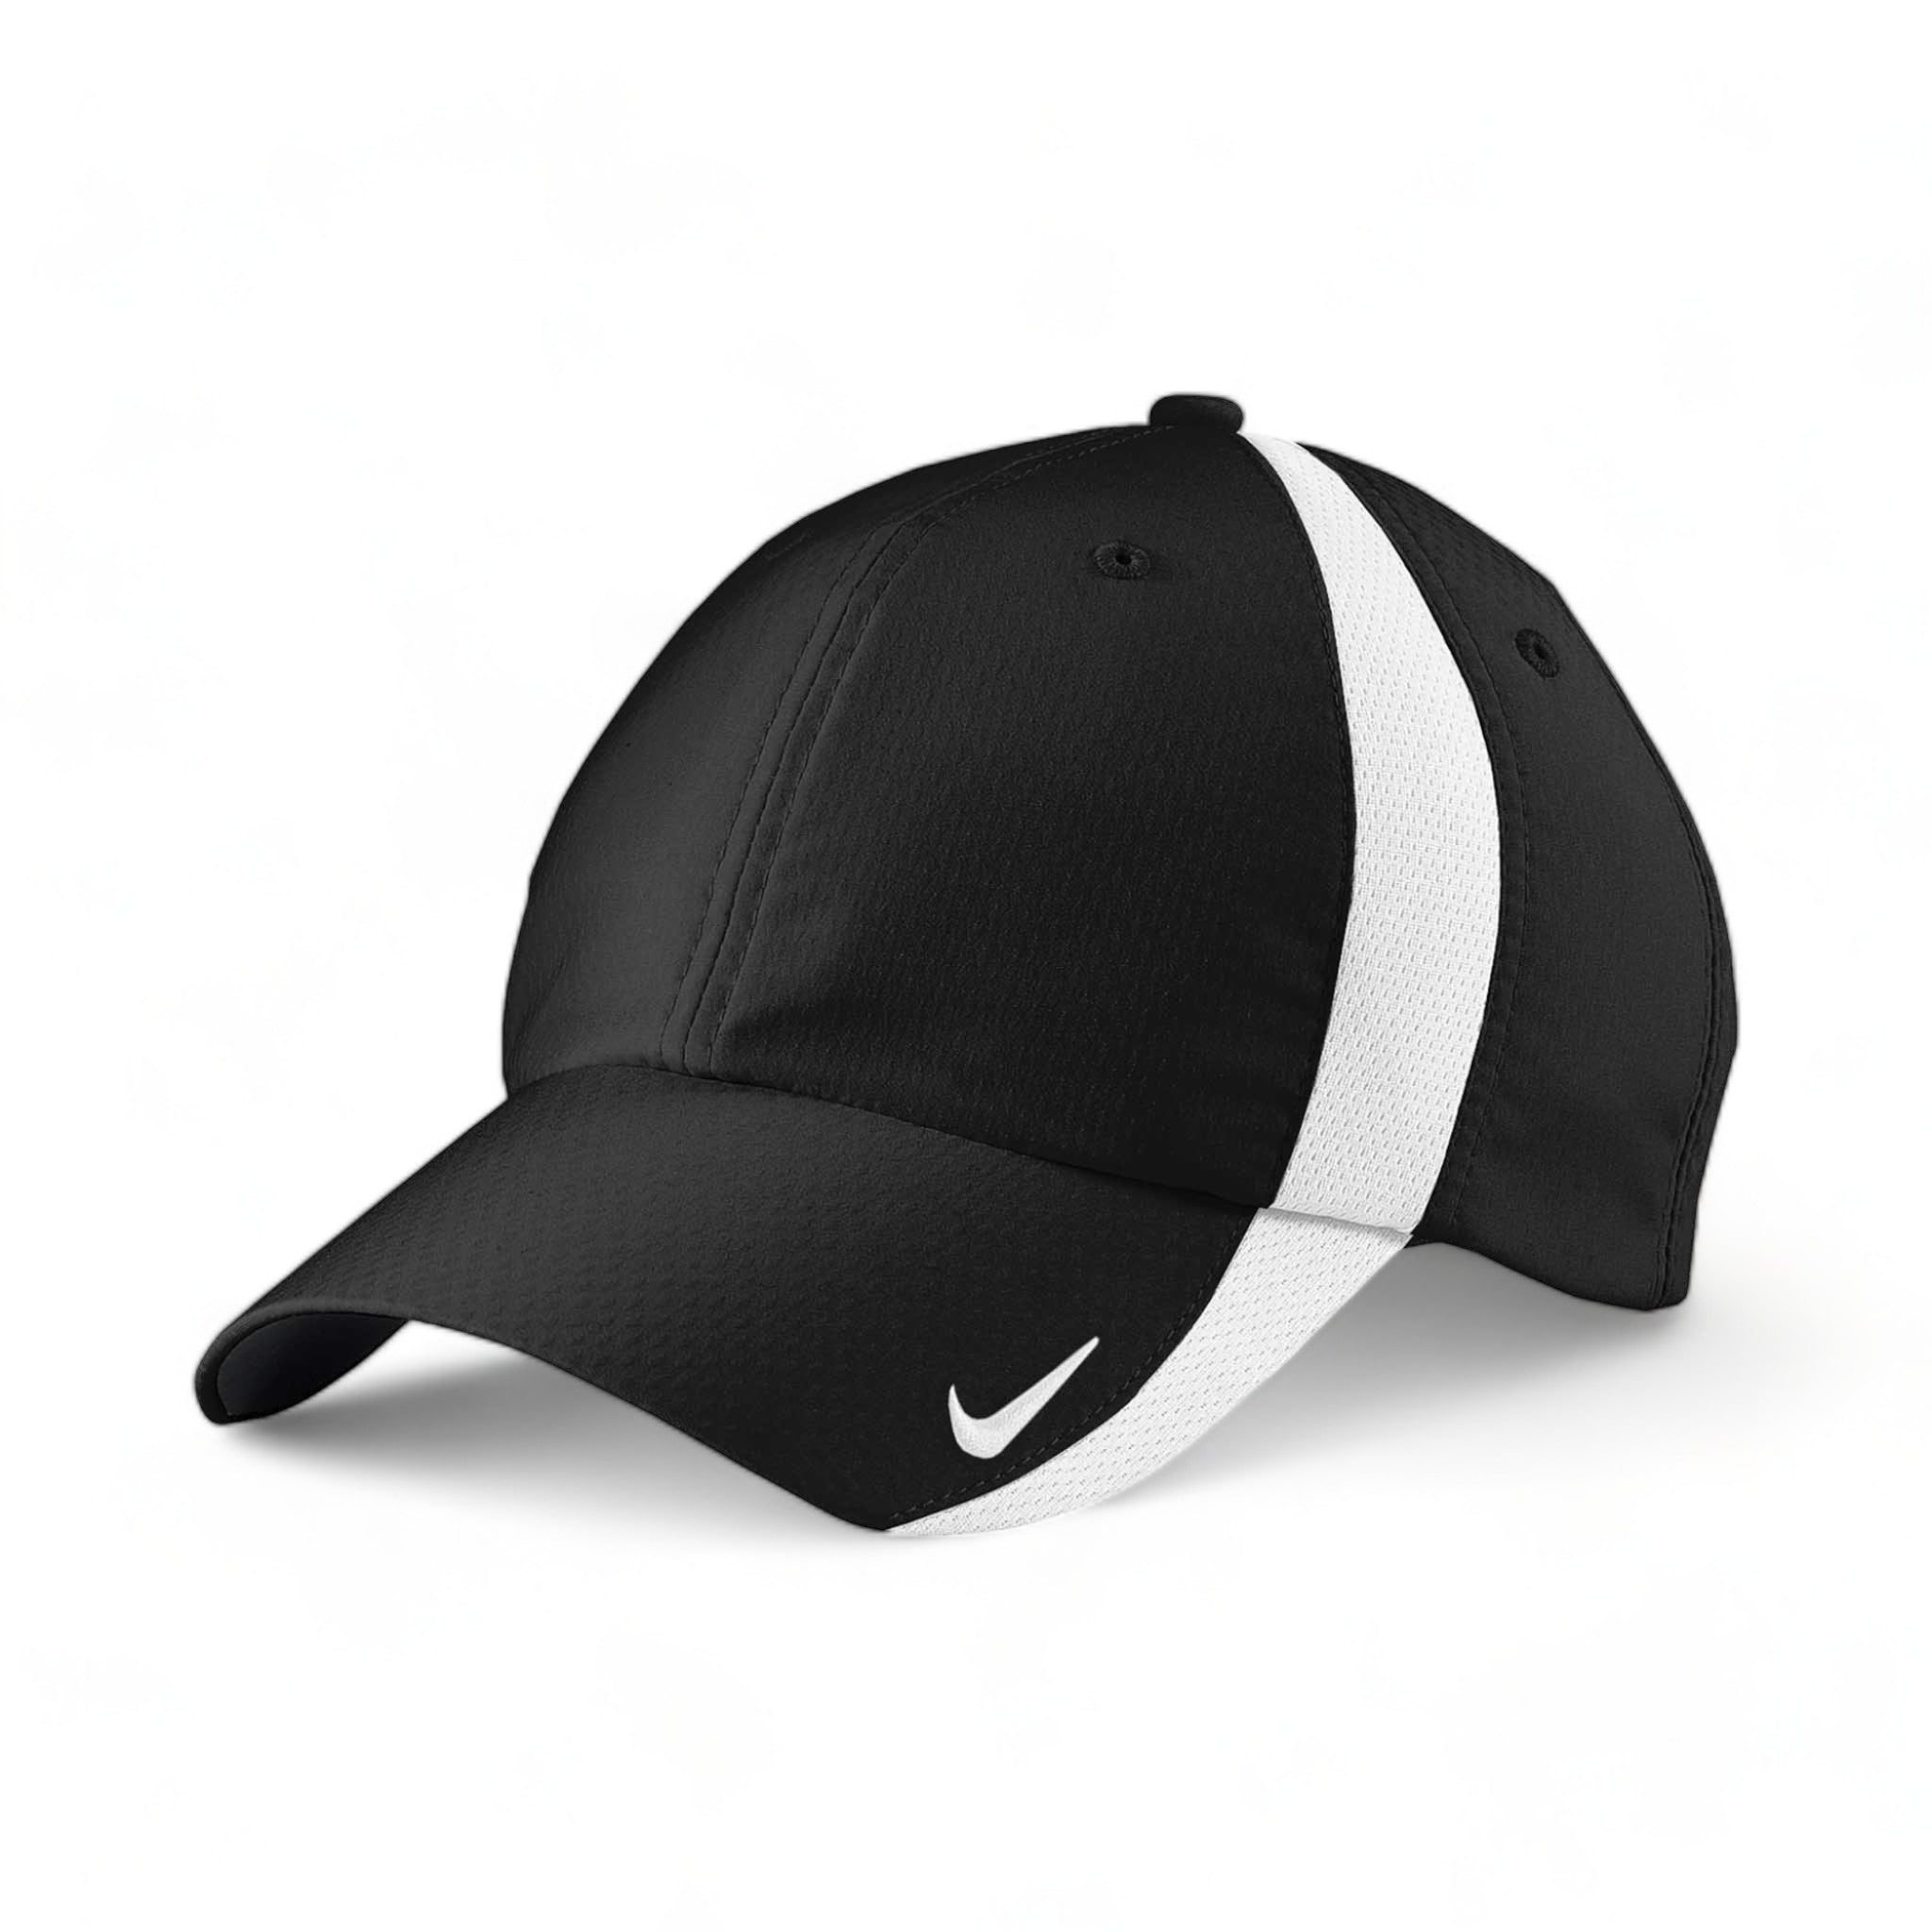 Side view of Nike NKFD9709 custom hat in black and white